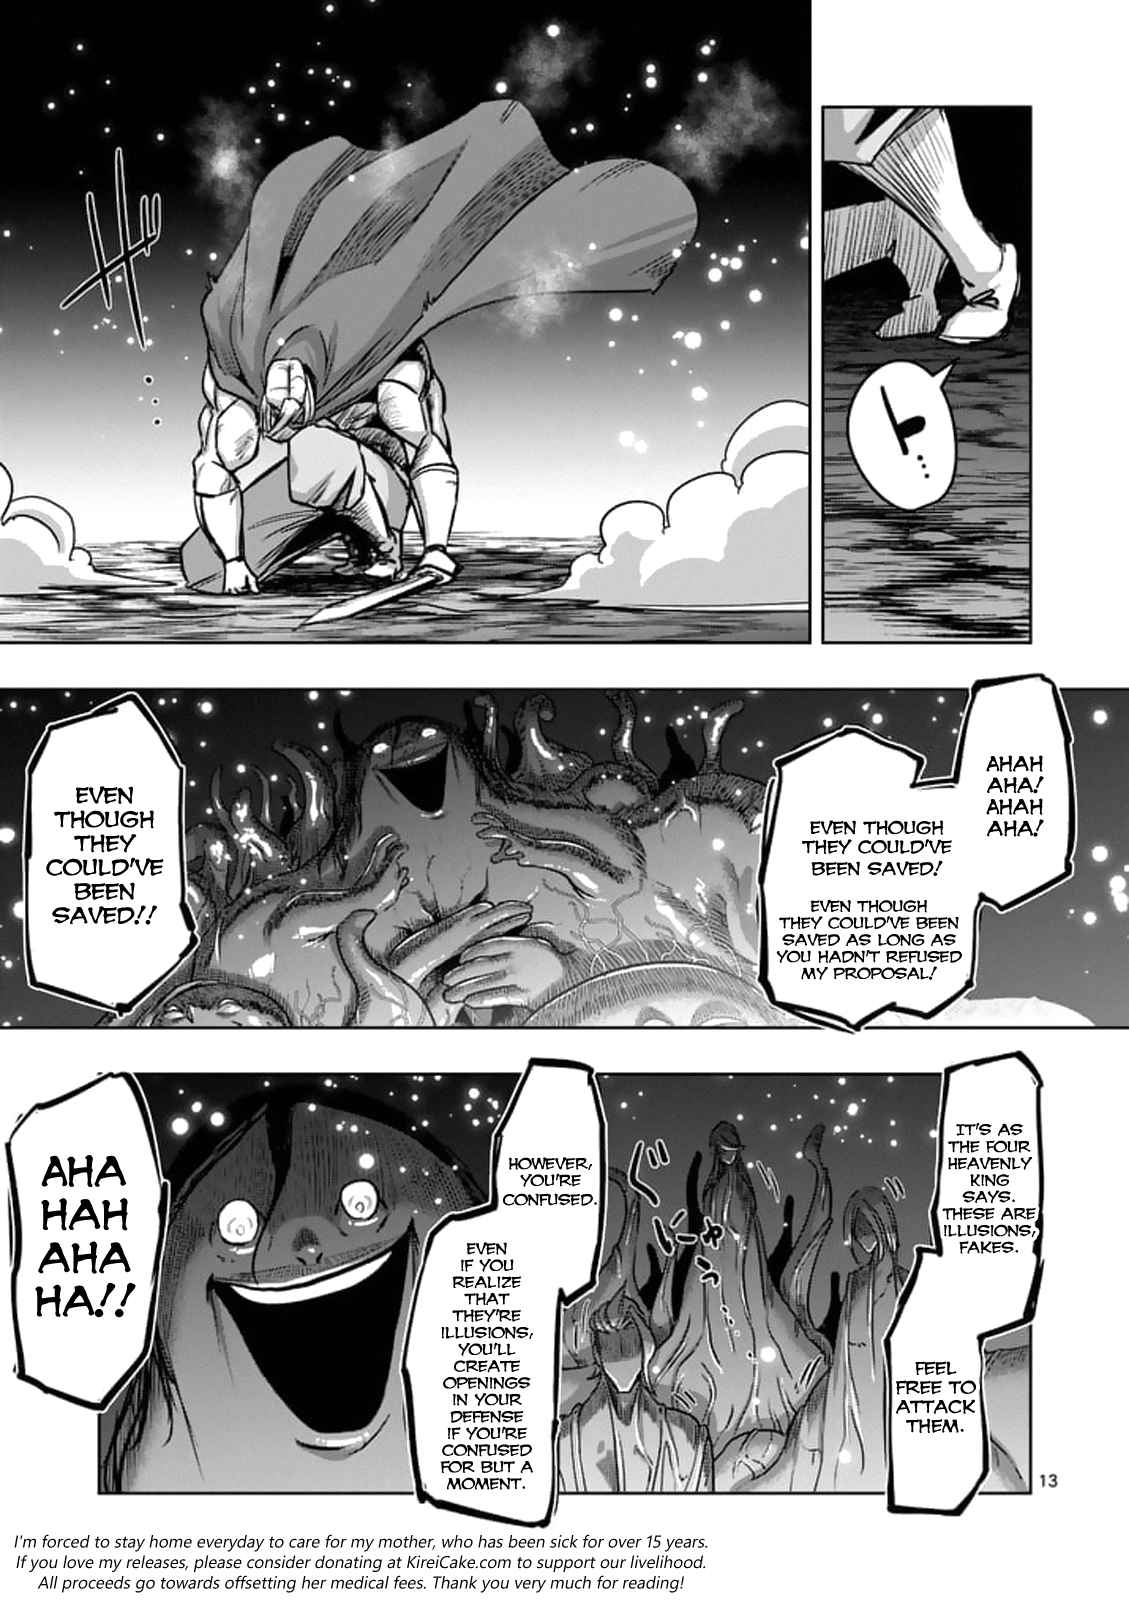 Helck Ch.93.1